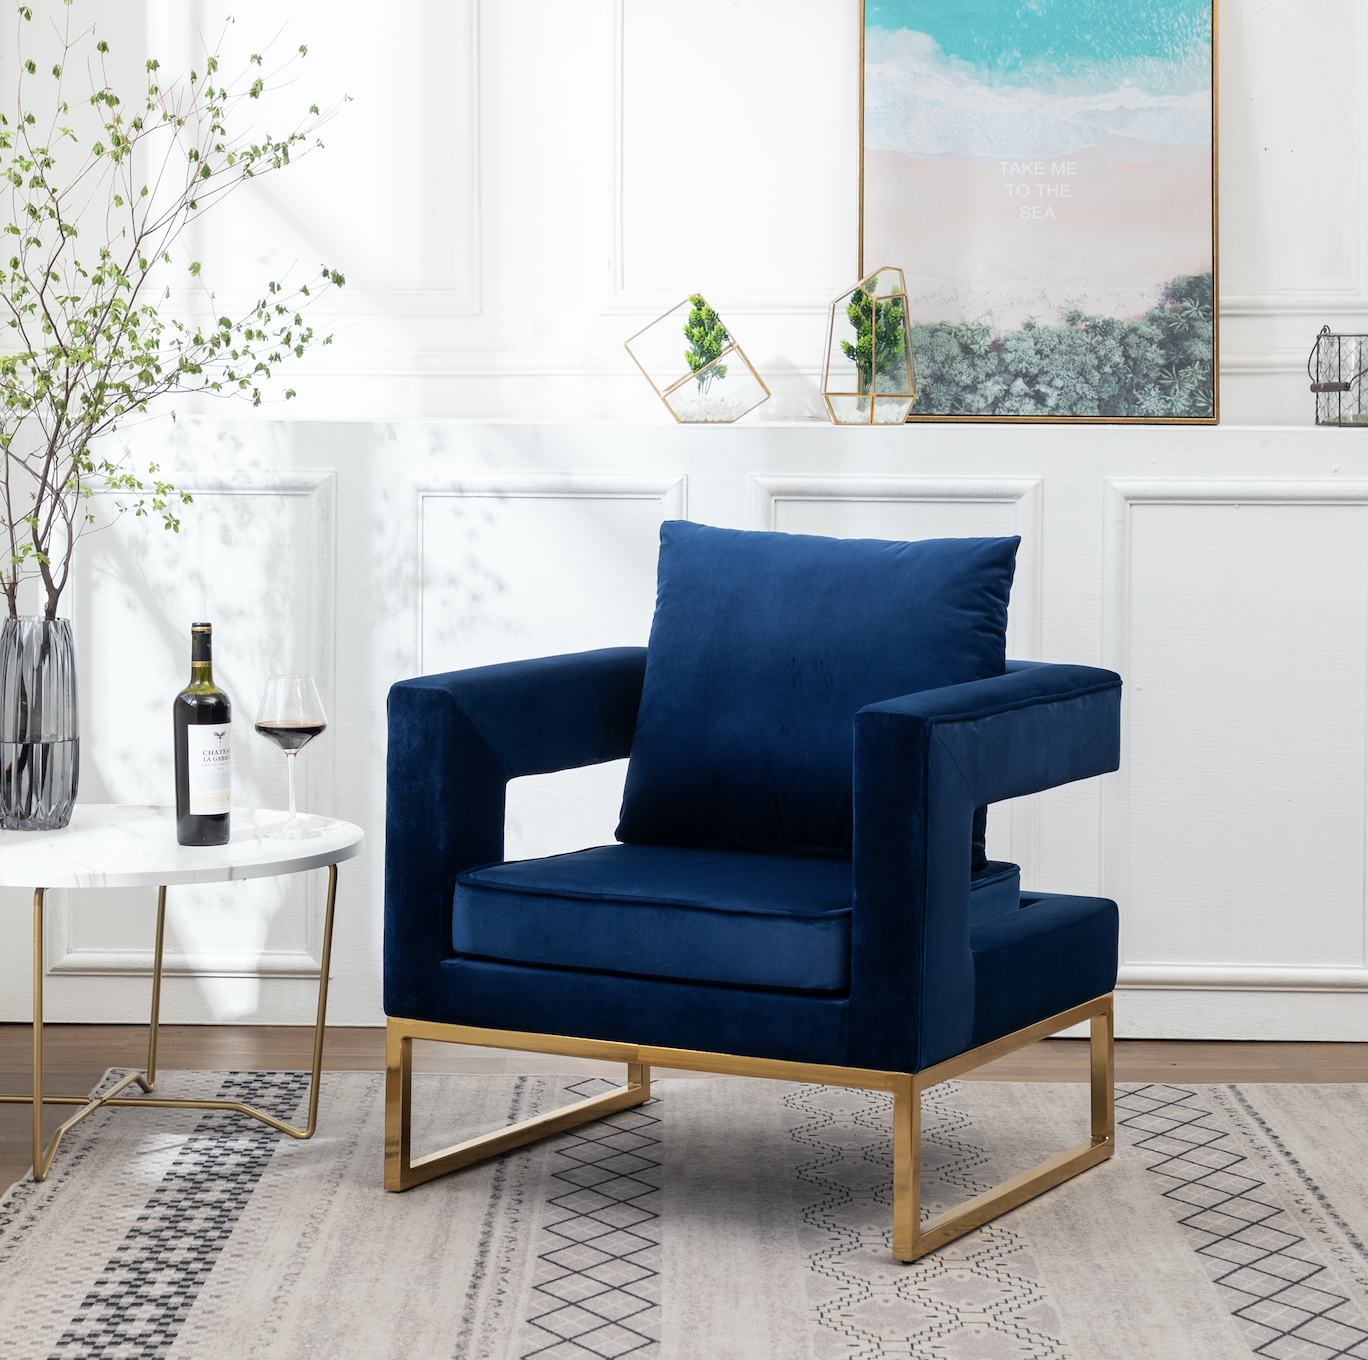 Blue square chair